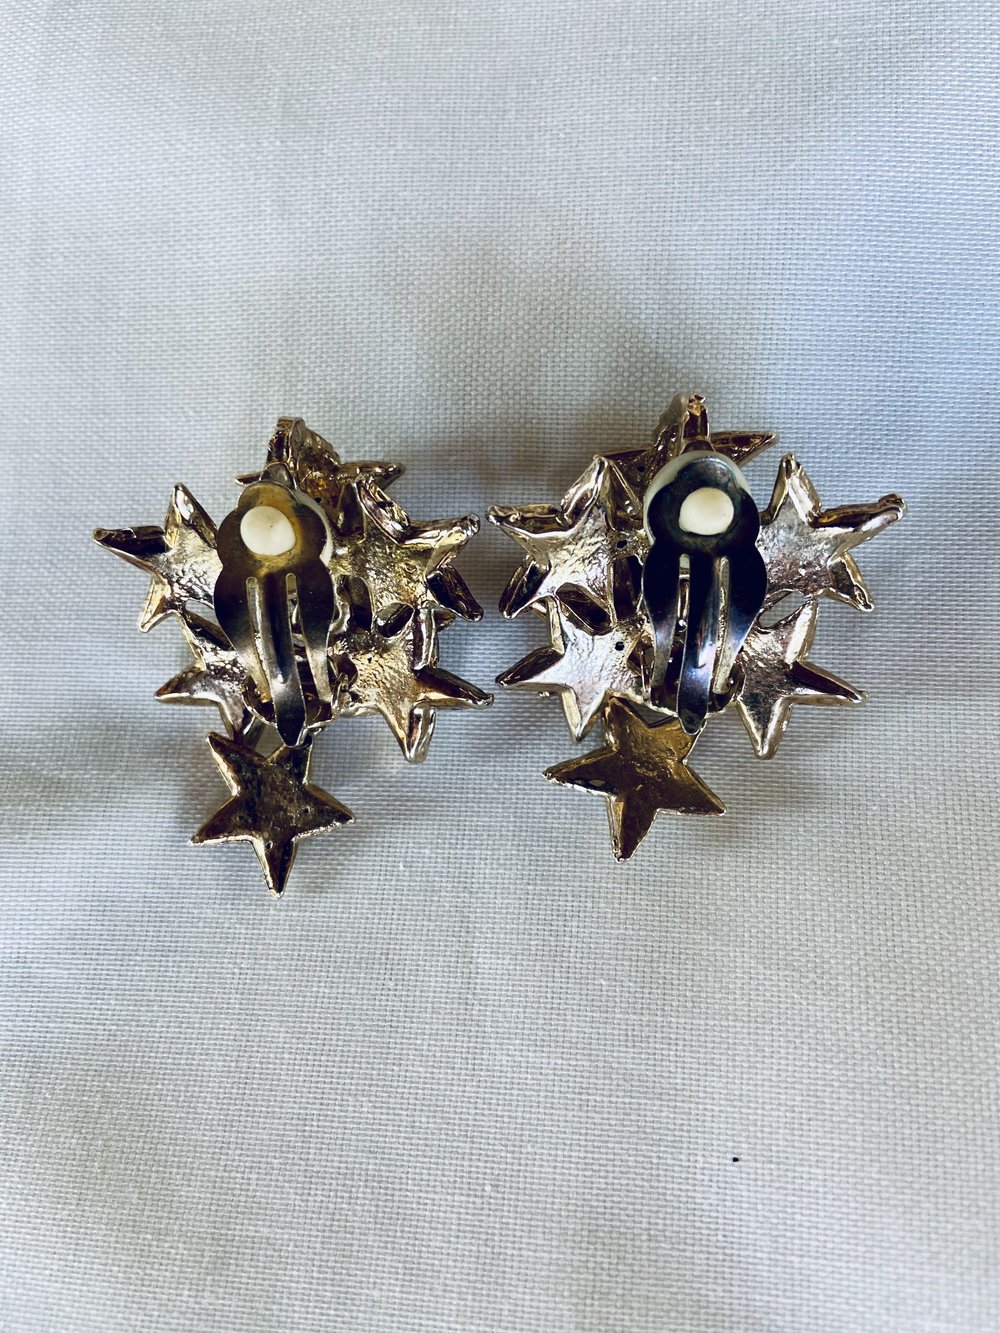 Chanel 1970s Goldtone Earrings With Large Rhinestone